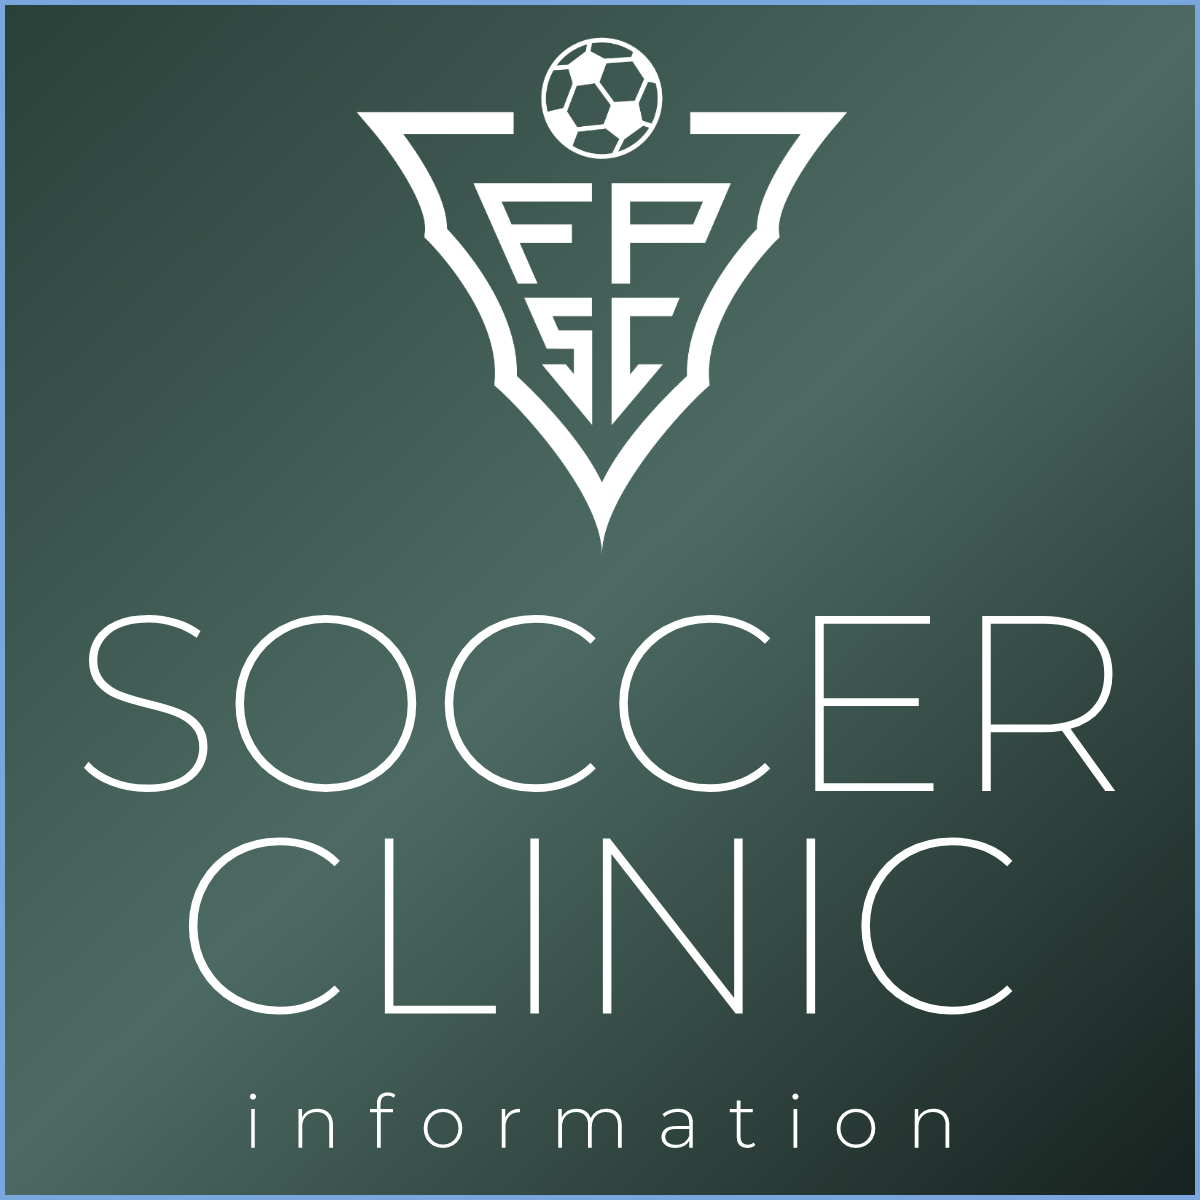 Click for Soccer Clinic Information